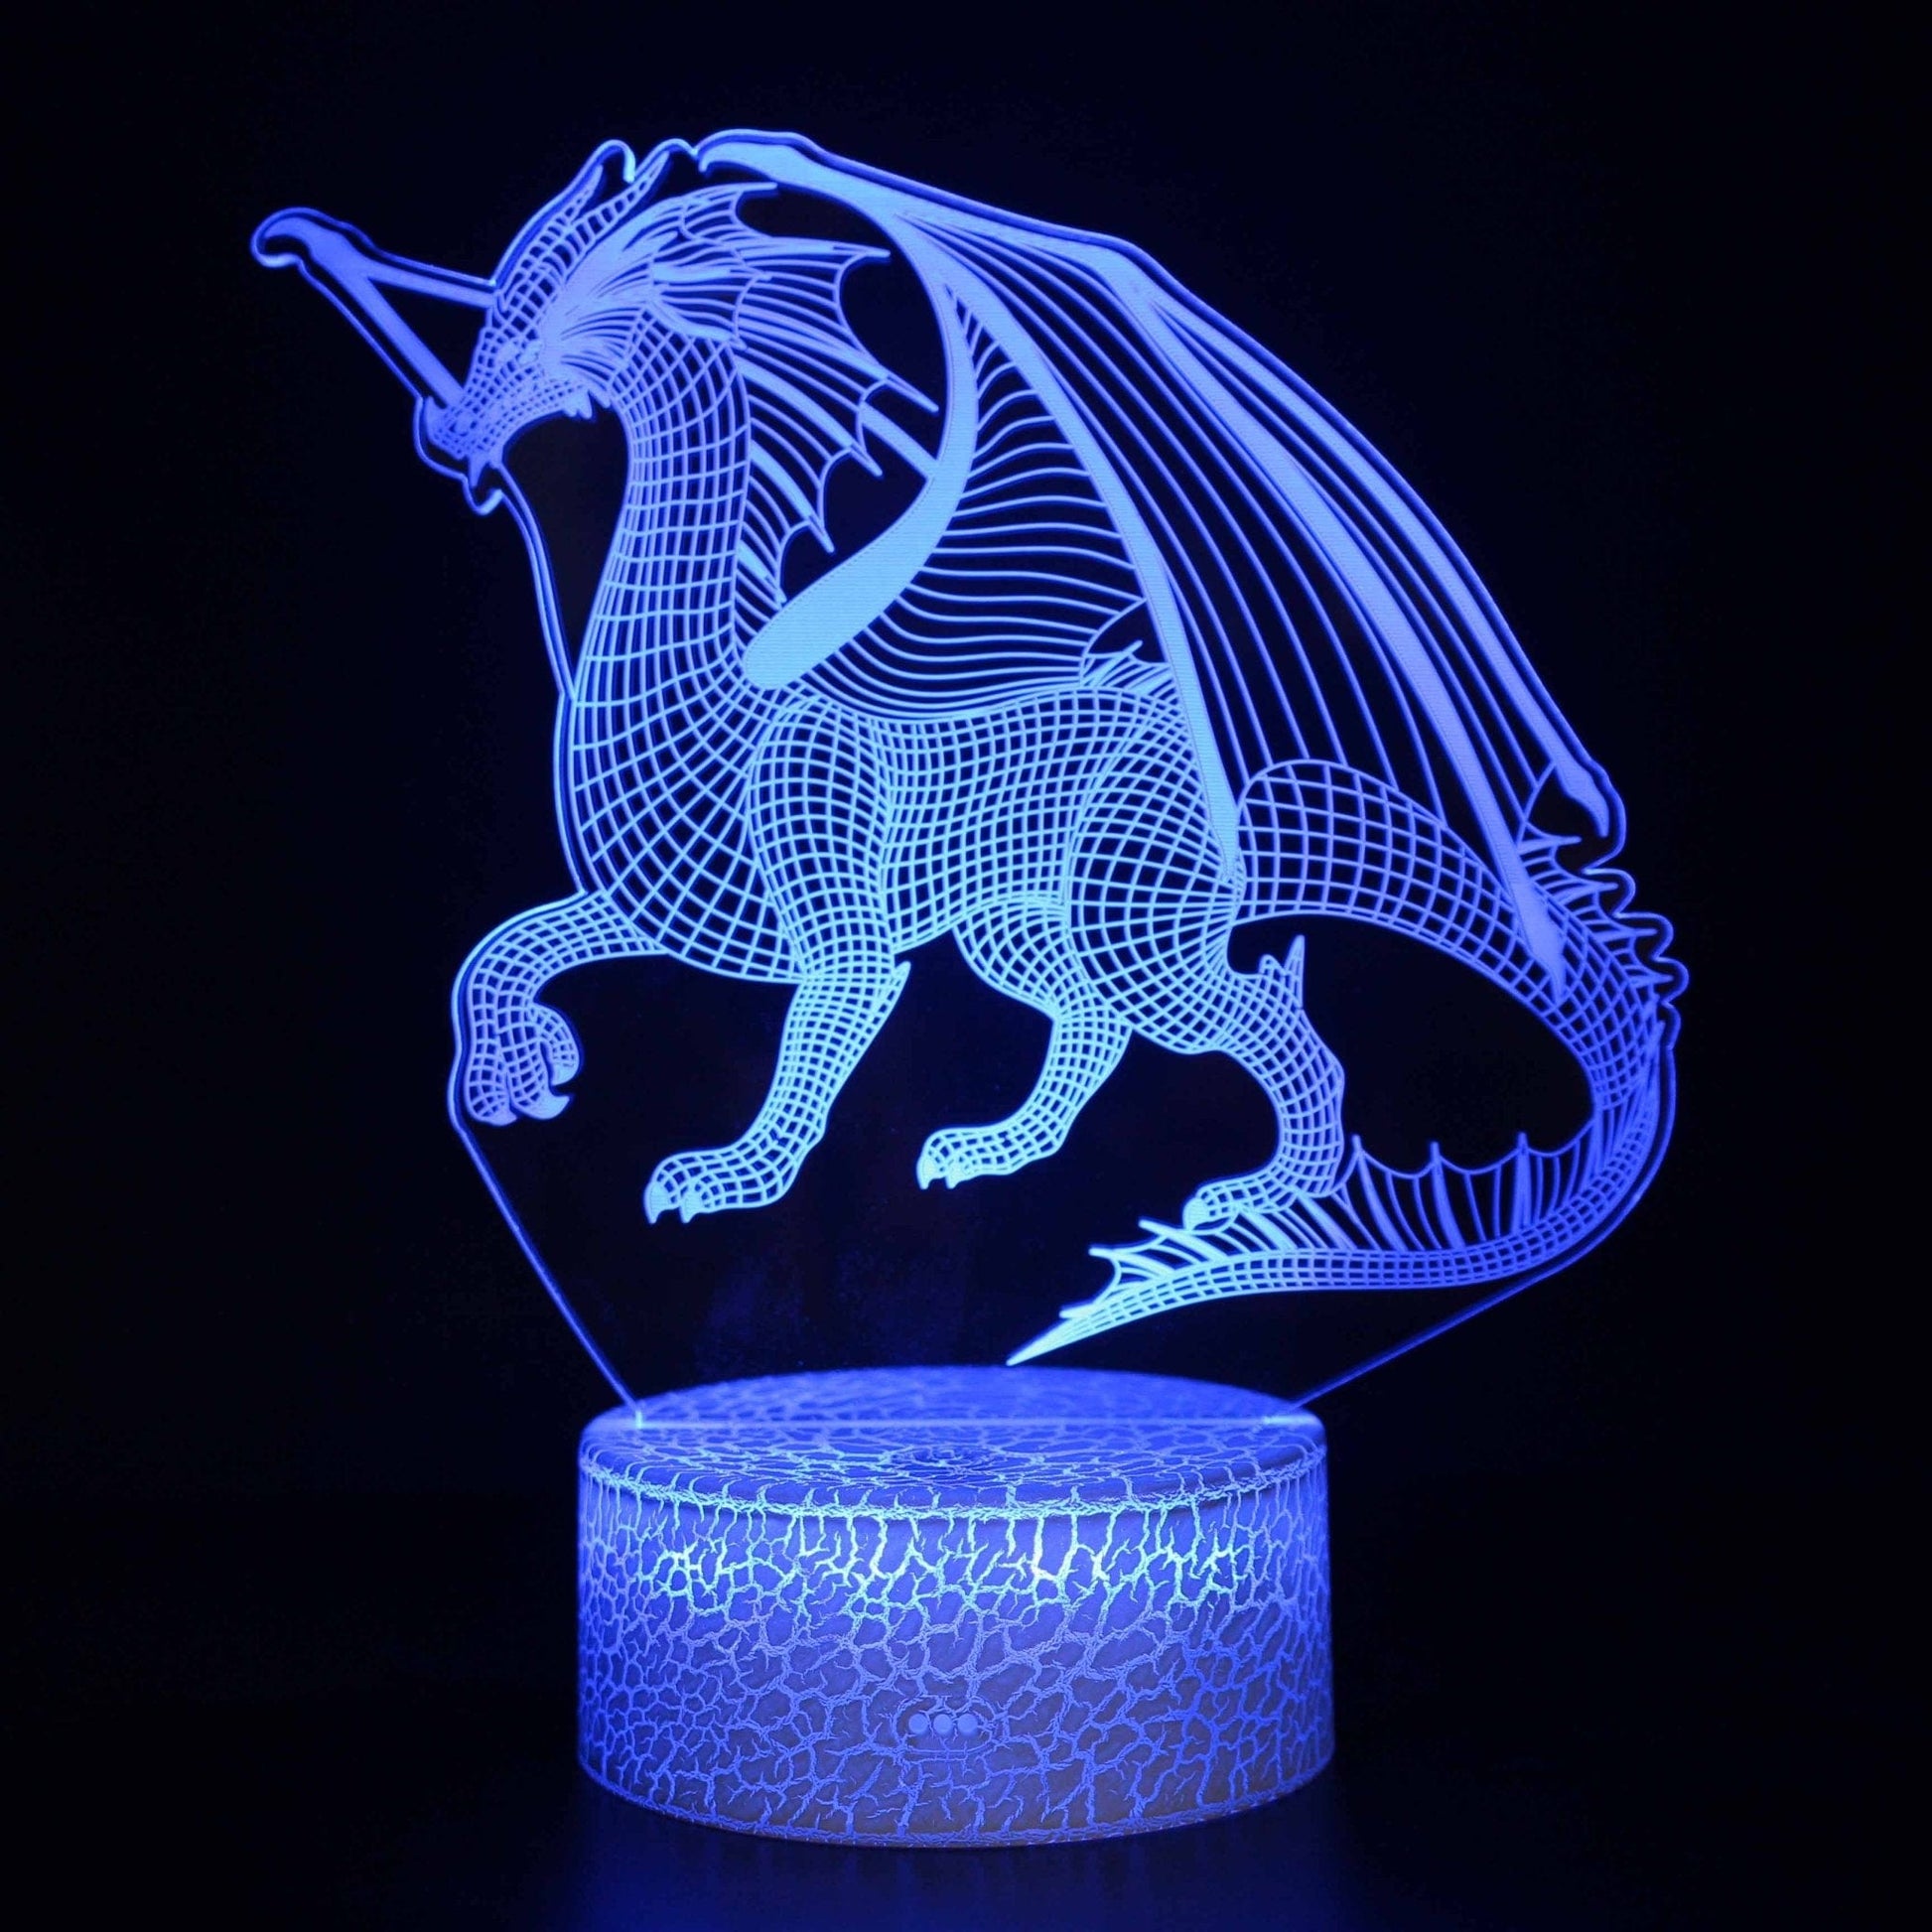 Dinosaur Series 3D Table Lamp LED Colorful Touch Remote Control Gift Nightlight - CLASSY CLOSET BOUTIQUEDinosaur Series 3D Table Lamp LED Colorful Touch Remote Control Gift Nightlighteperlo643800BA95AA4833823B8EA05937B11AKX-10847 Colors No Remote